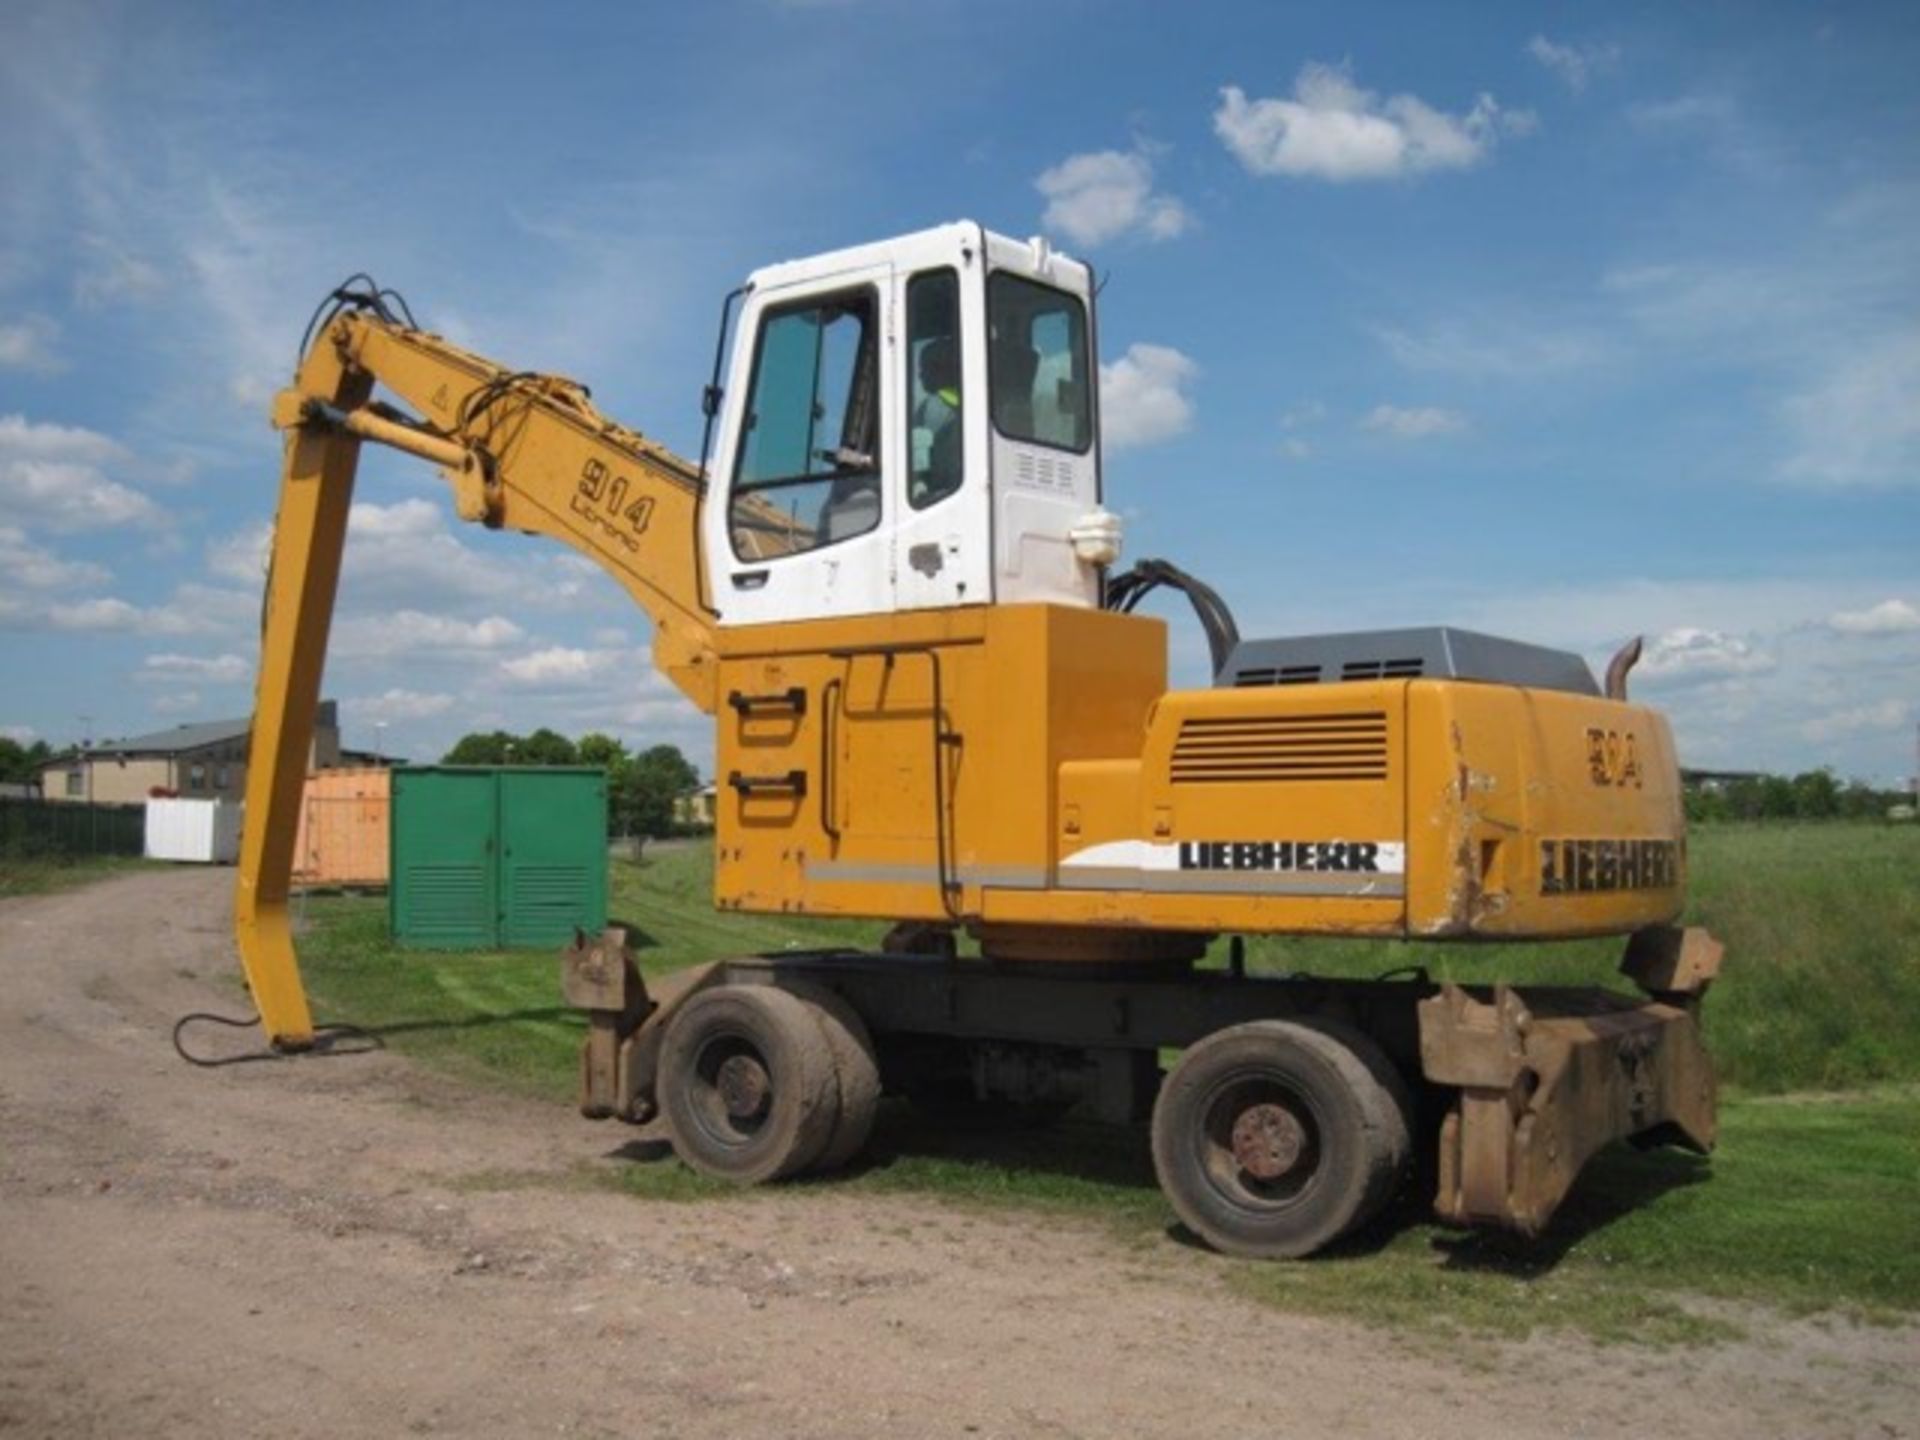 Liebherr 914 Rehandler on Wheels
2003
Very good condition, high cab, solid wheels and long reach - Image 2 of 4